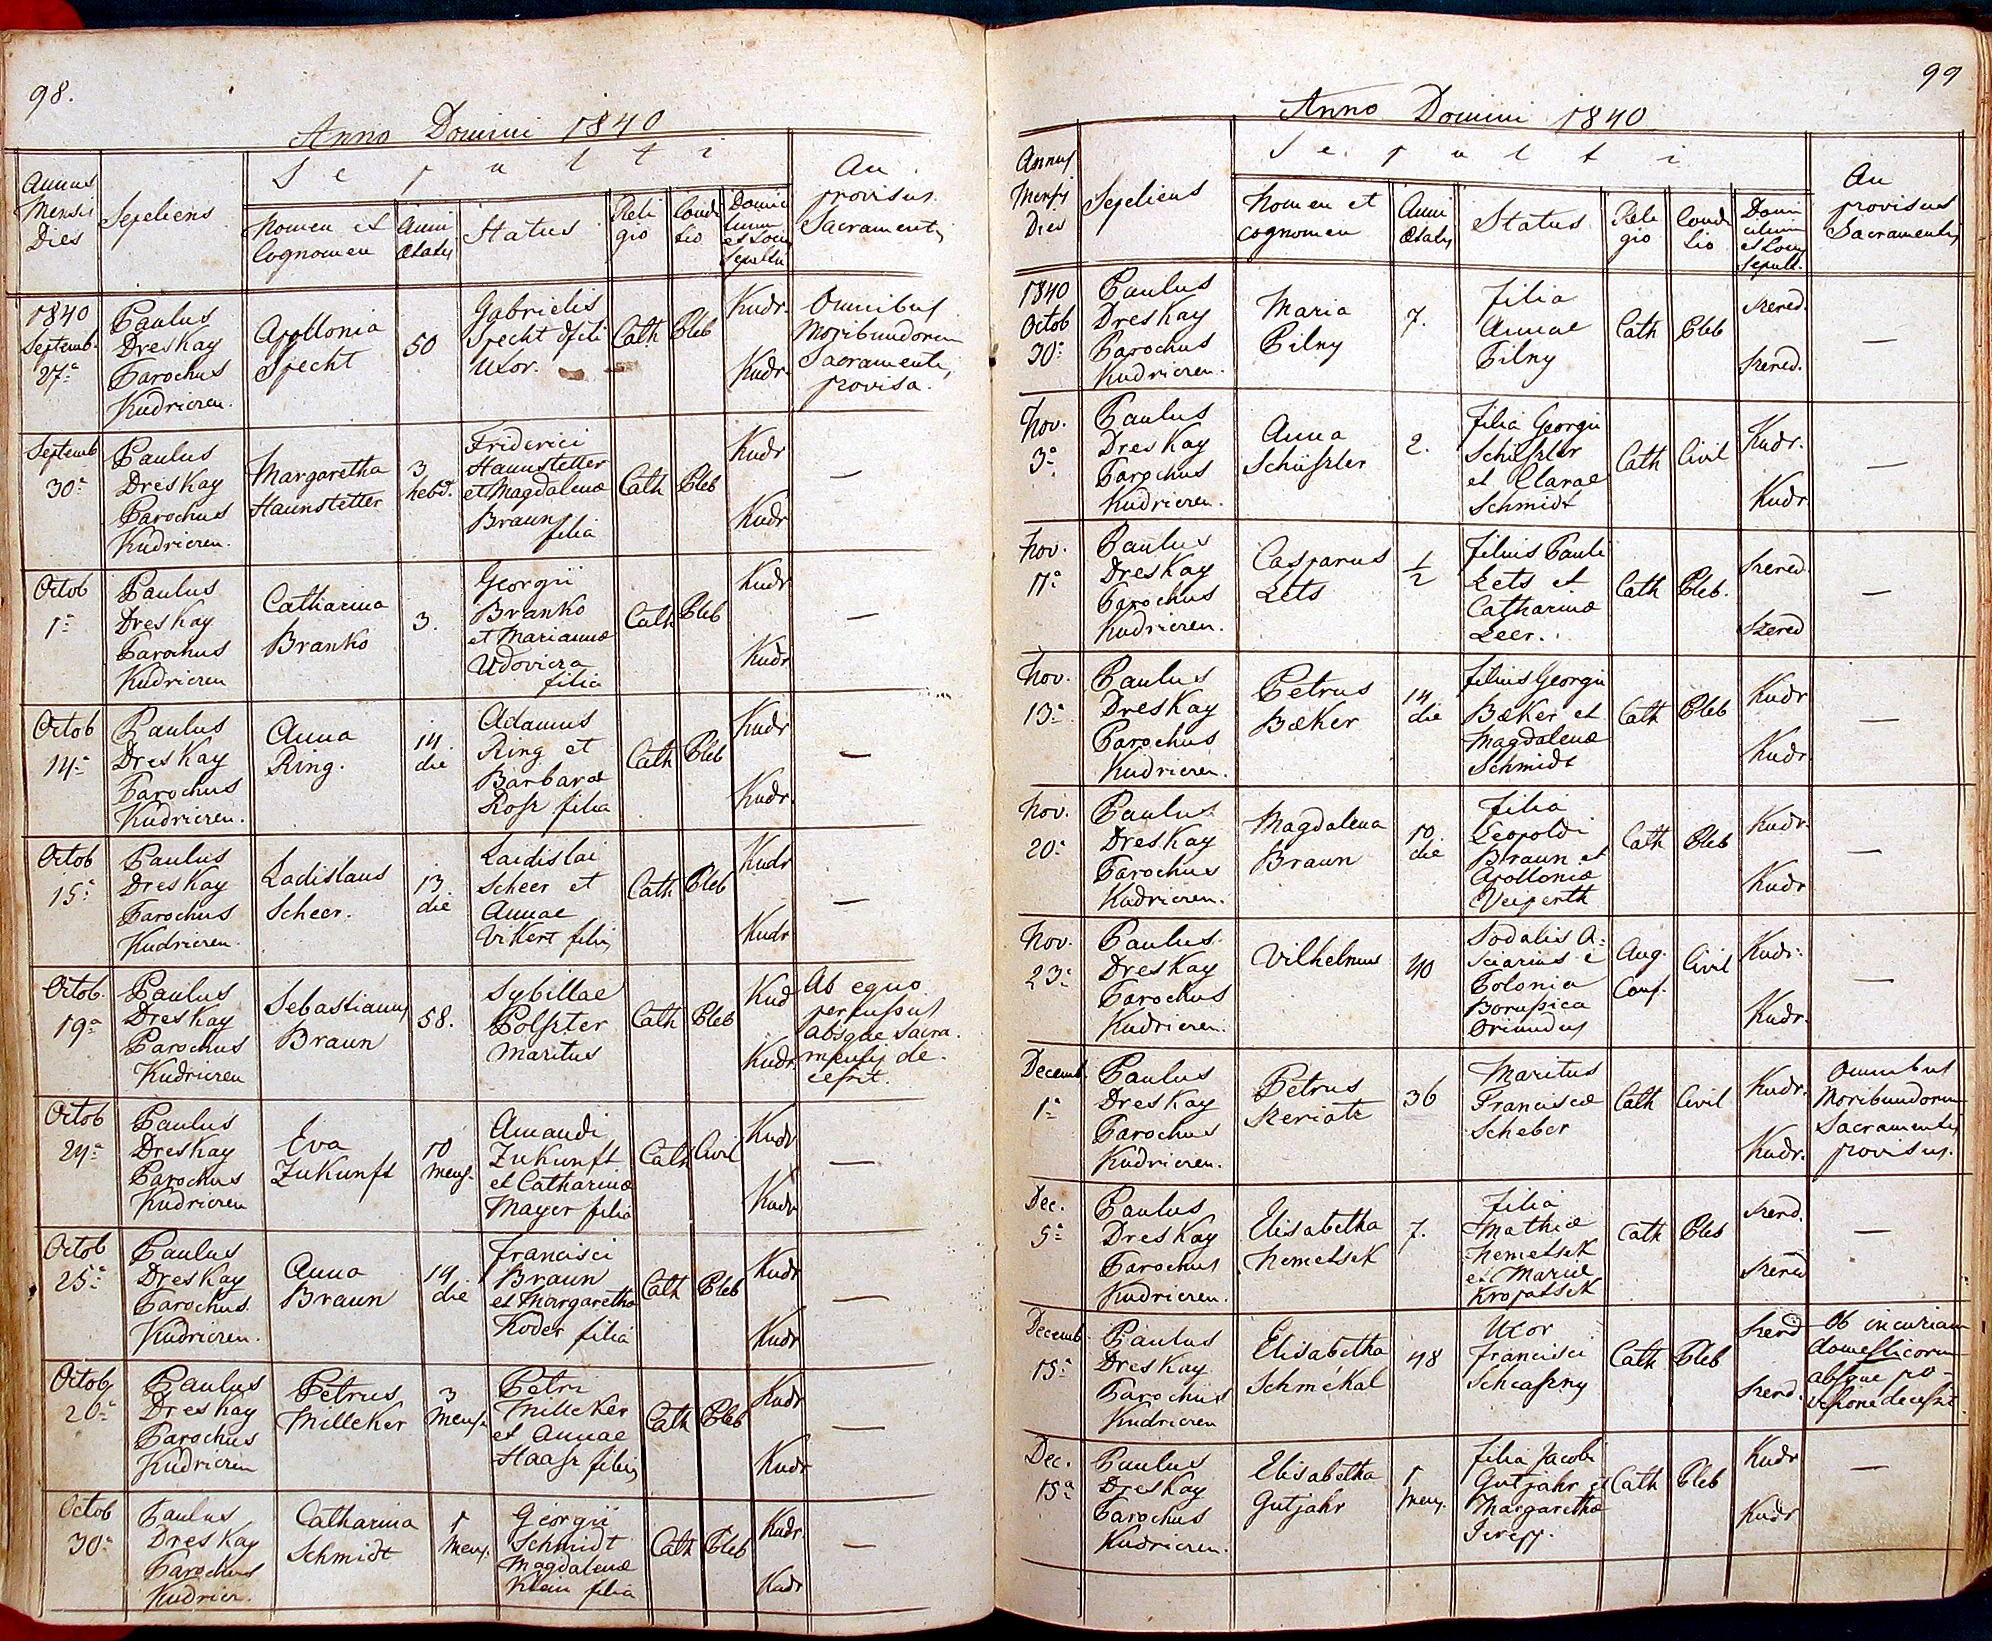 images/church_records/DEATHS/1829-1851D/098 i 099